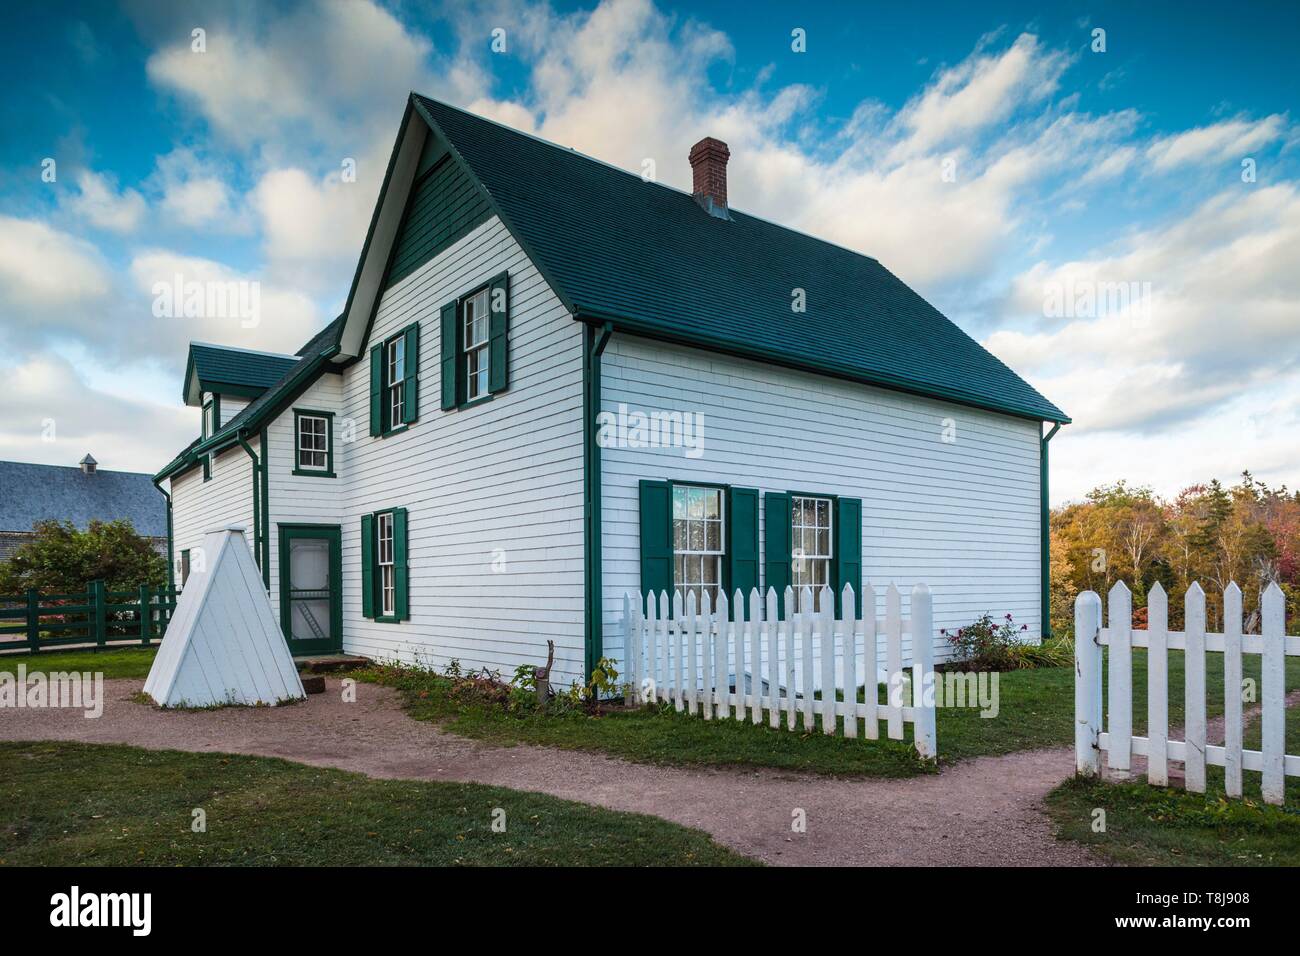 Canada, Prince Edward Island, Cavendish, Green Gables House, former home of Anne of Green Gables author Lucy Maud Montgomery Stock Photo